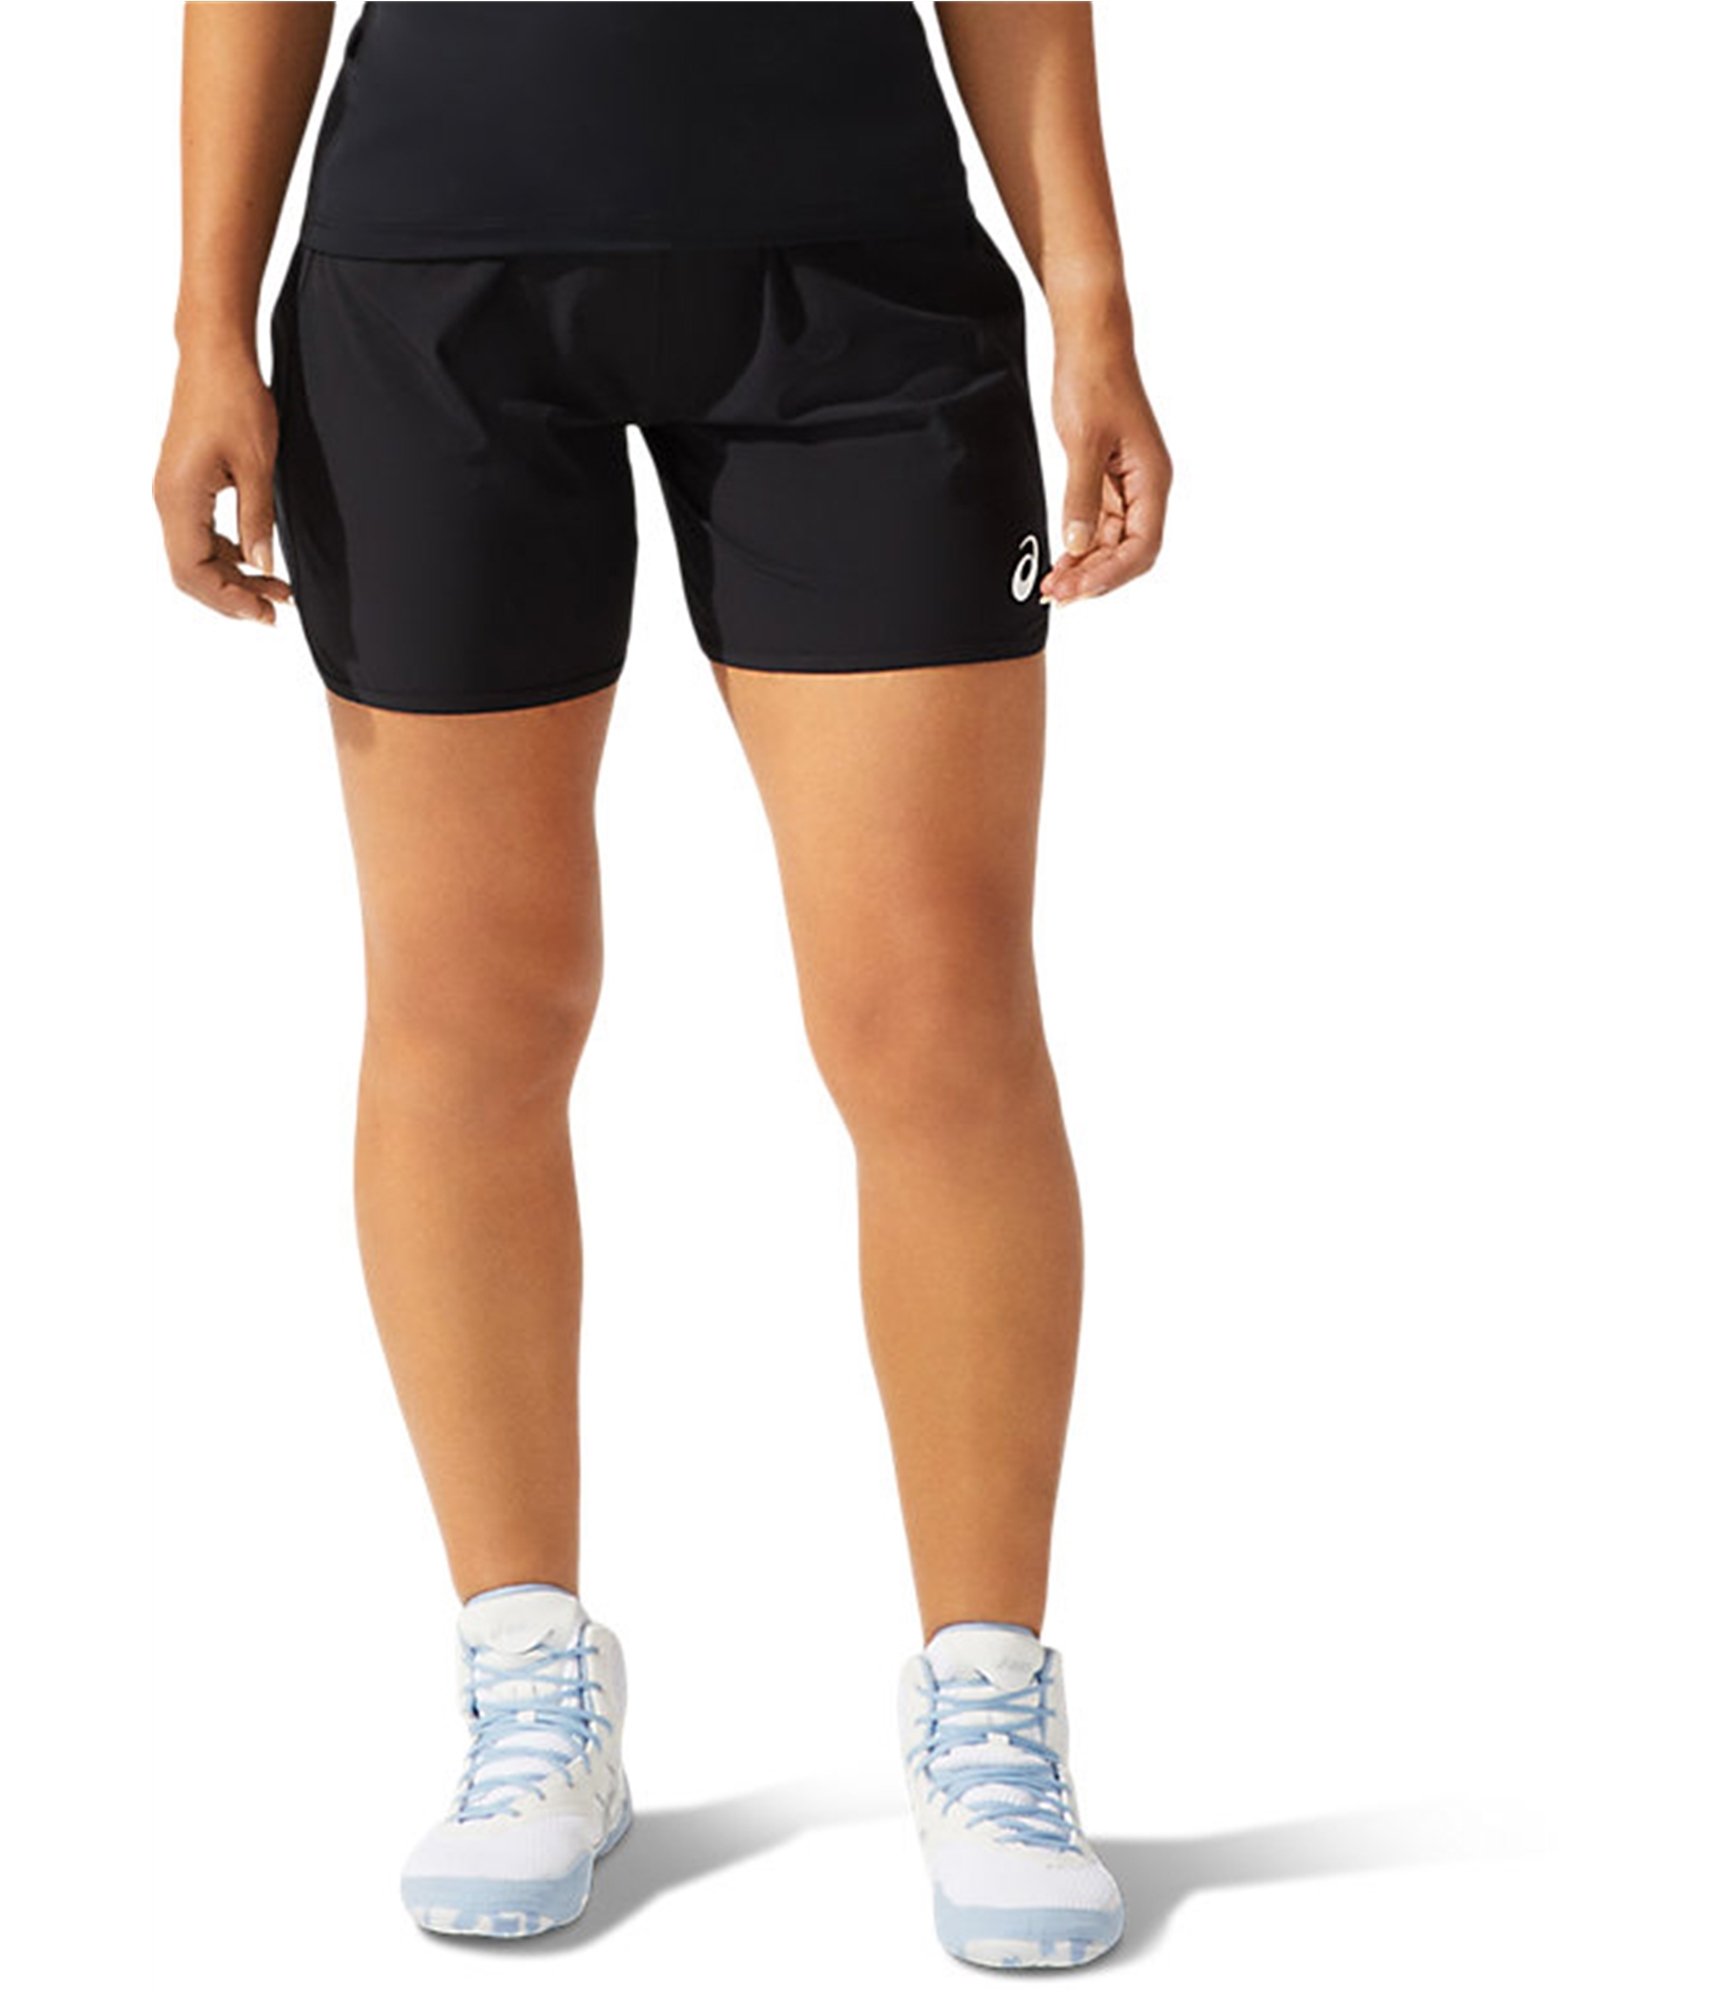 Buy a Tagsweekly Wrestling Athletic 2 | Womens Shorts Piece Asics Workout